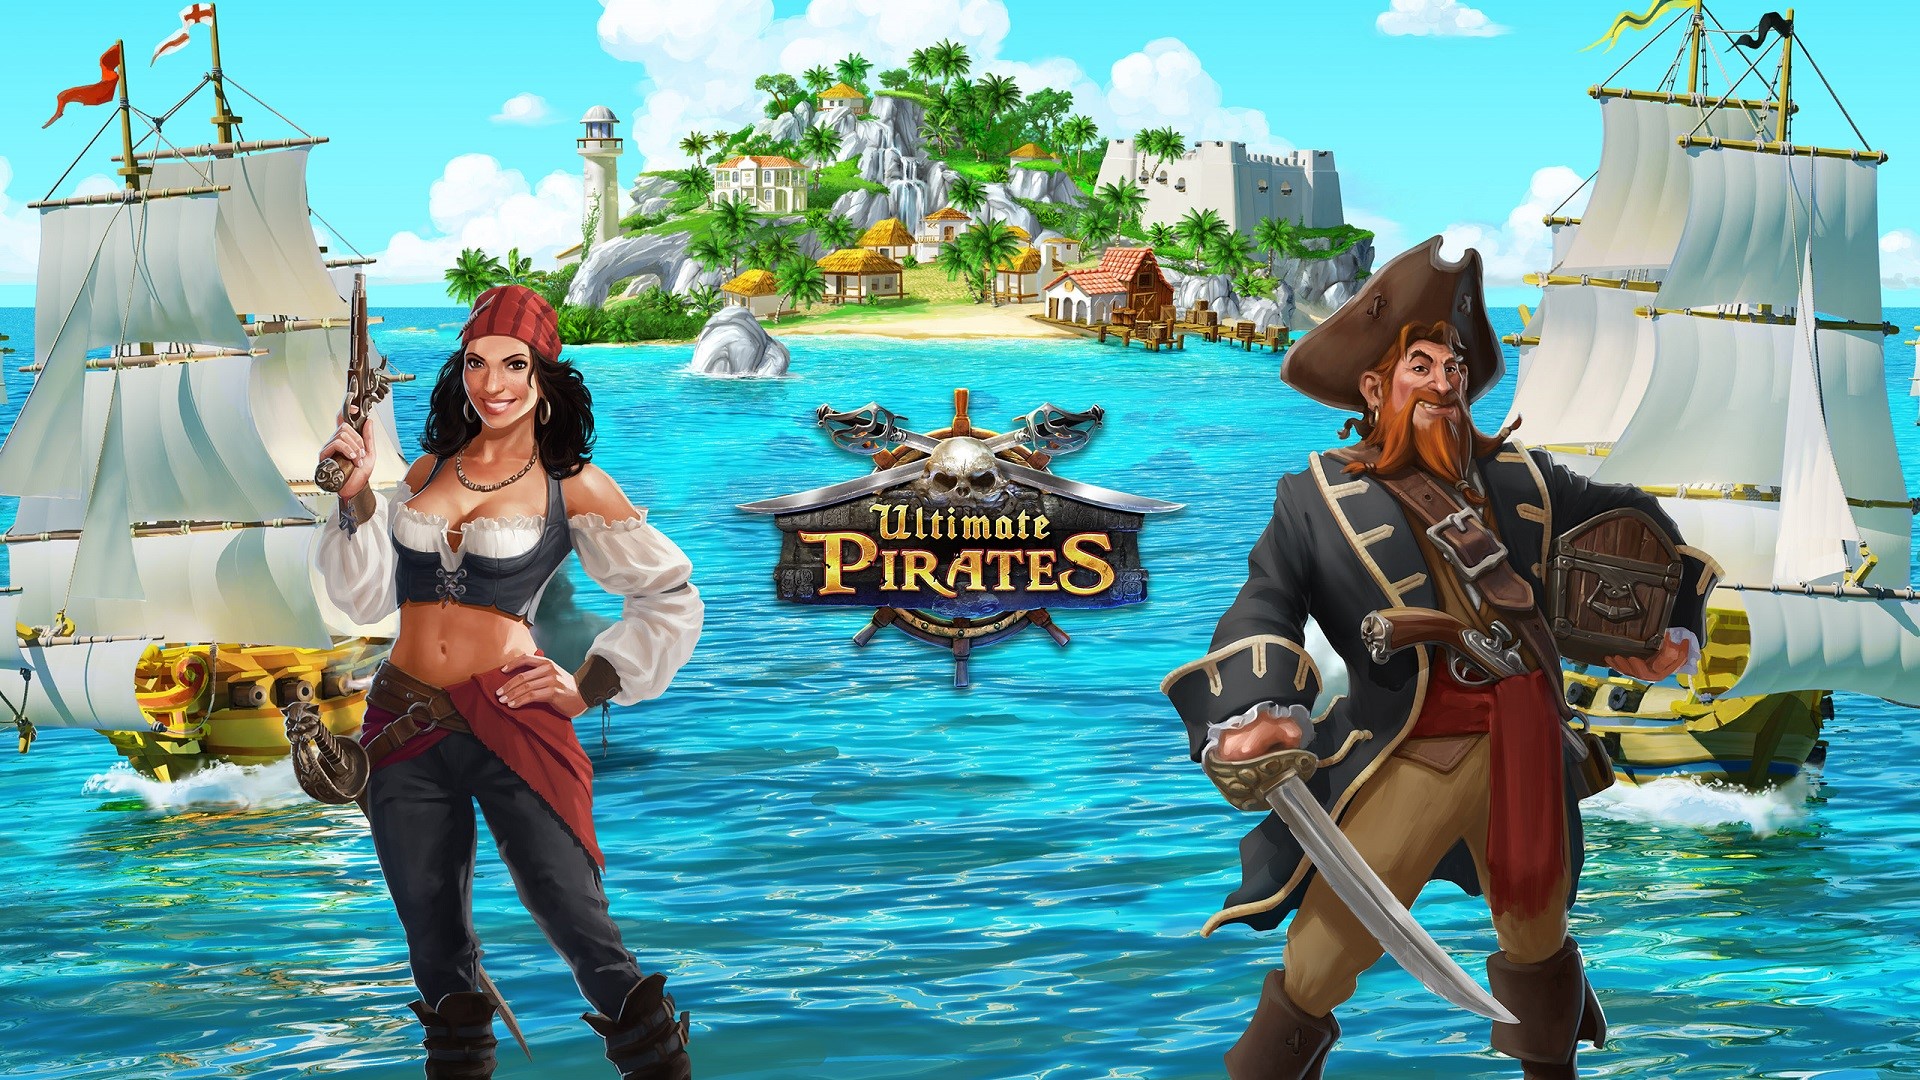 Ultimate Pirates Video Games Pirates Video Game Art Water Video Game Characters Gun Sword Pirate Hat 1920x1080